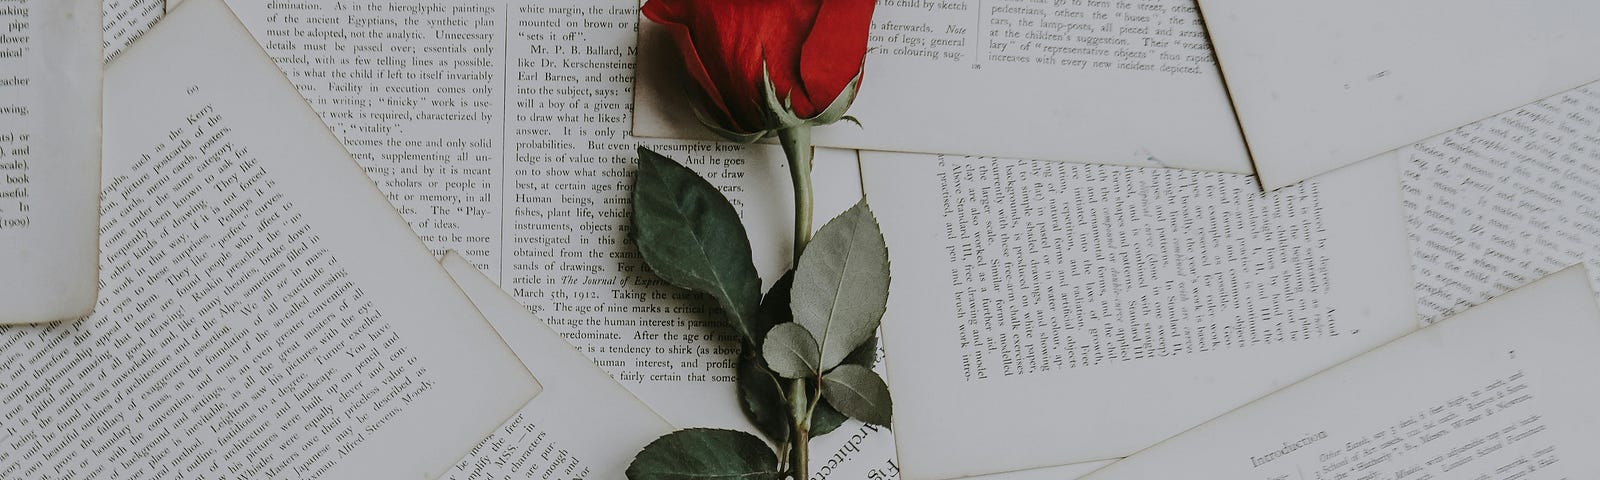 a red rose against pages of a book